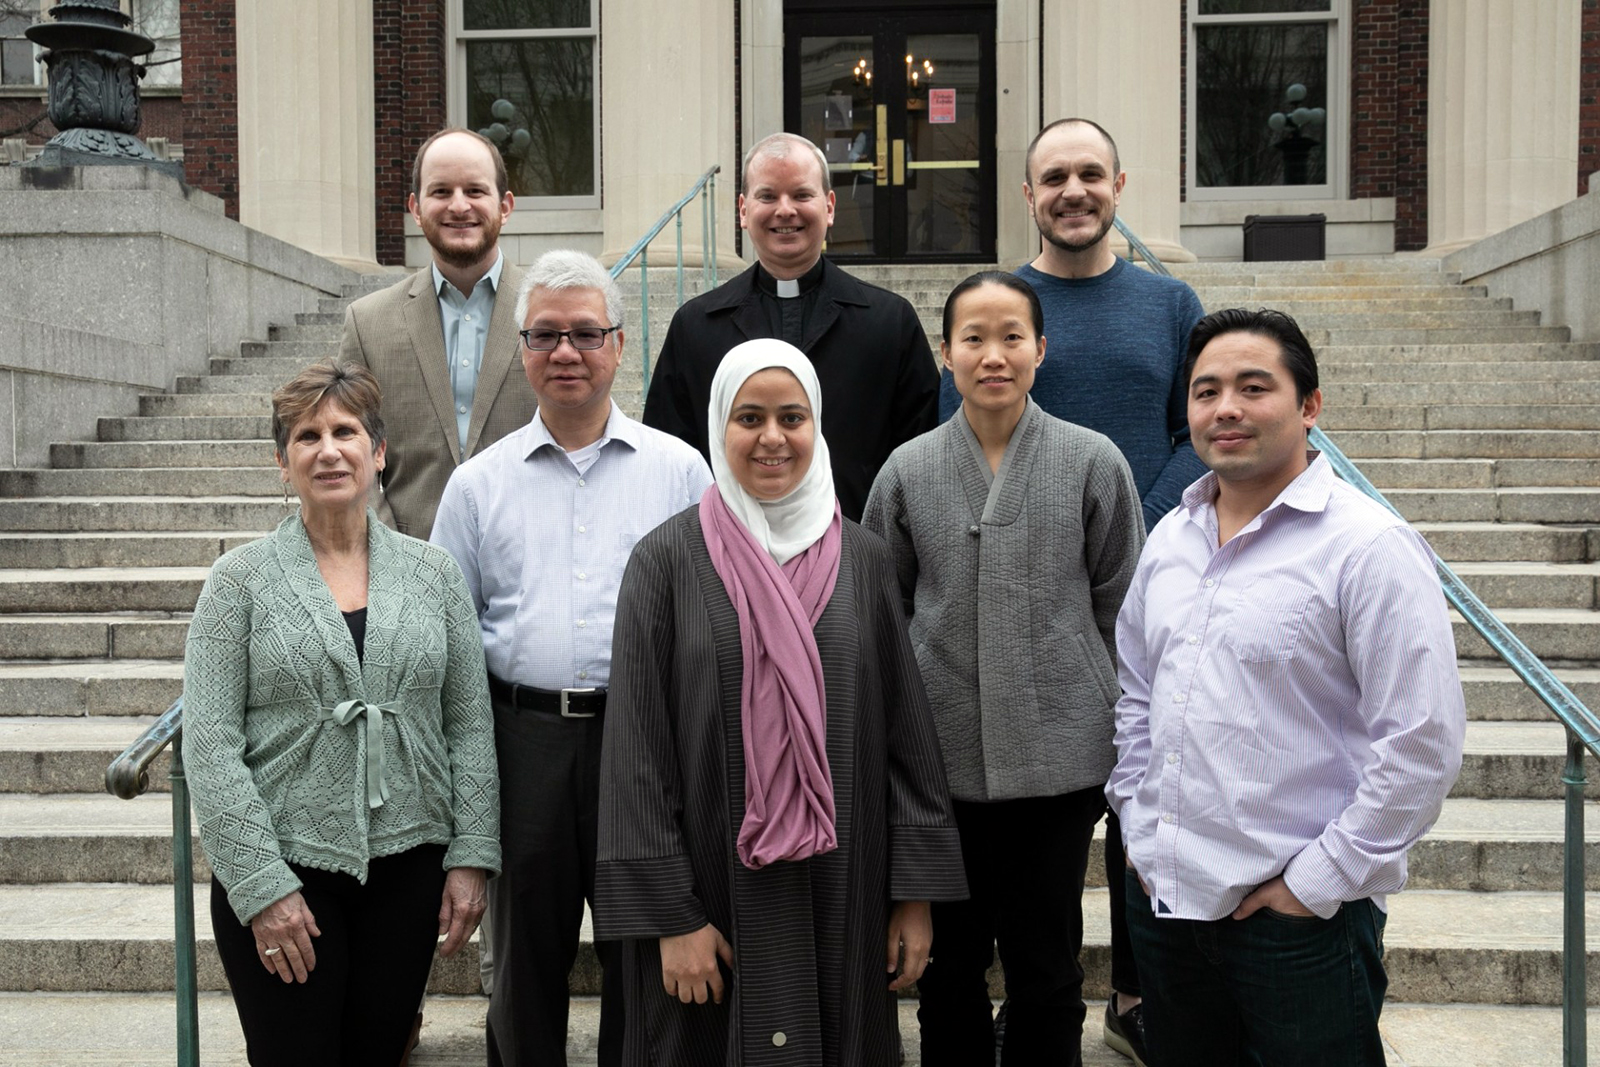 Anne Klaeysen, left, and other Religious Life Advisers at Columbia University in New York. Photo courtesy Columbia University